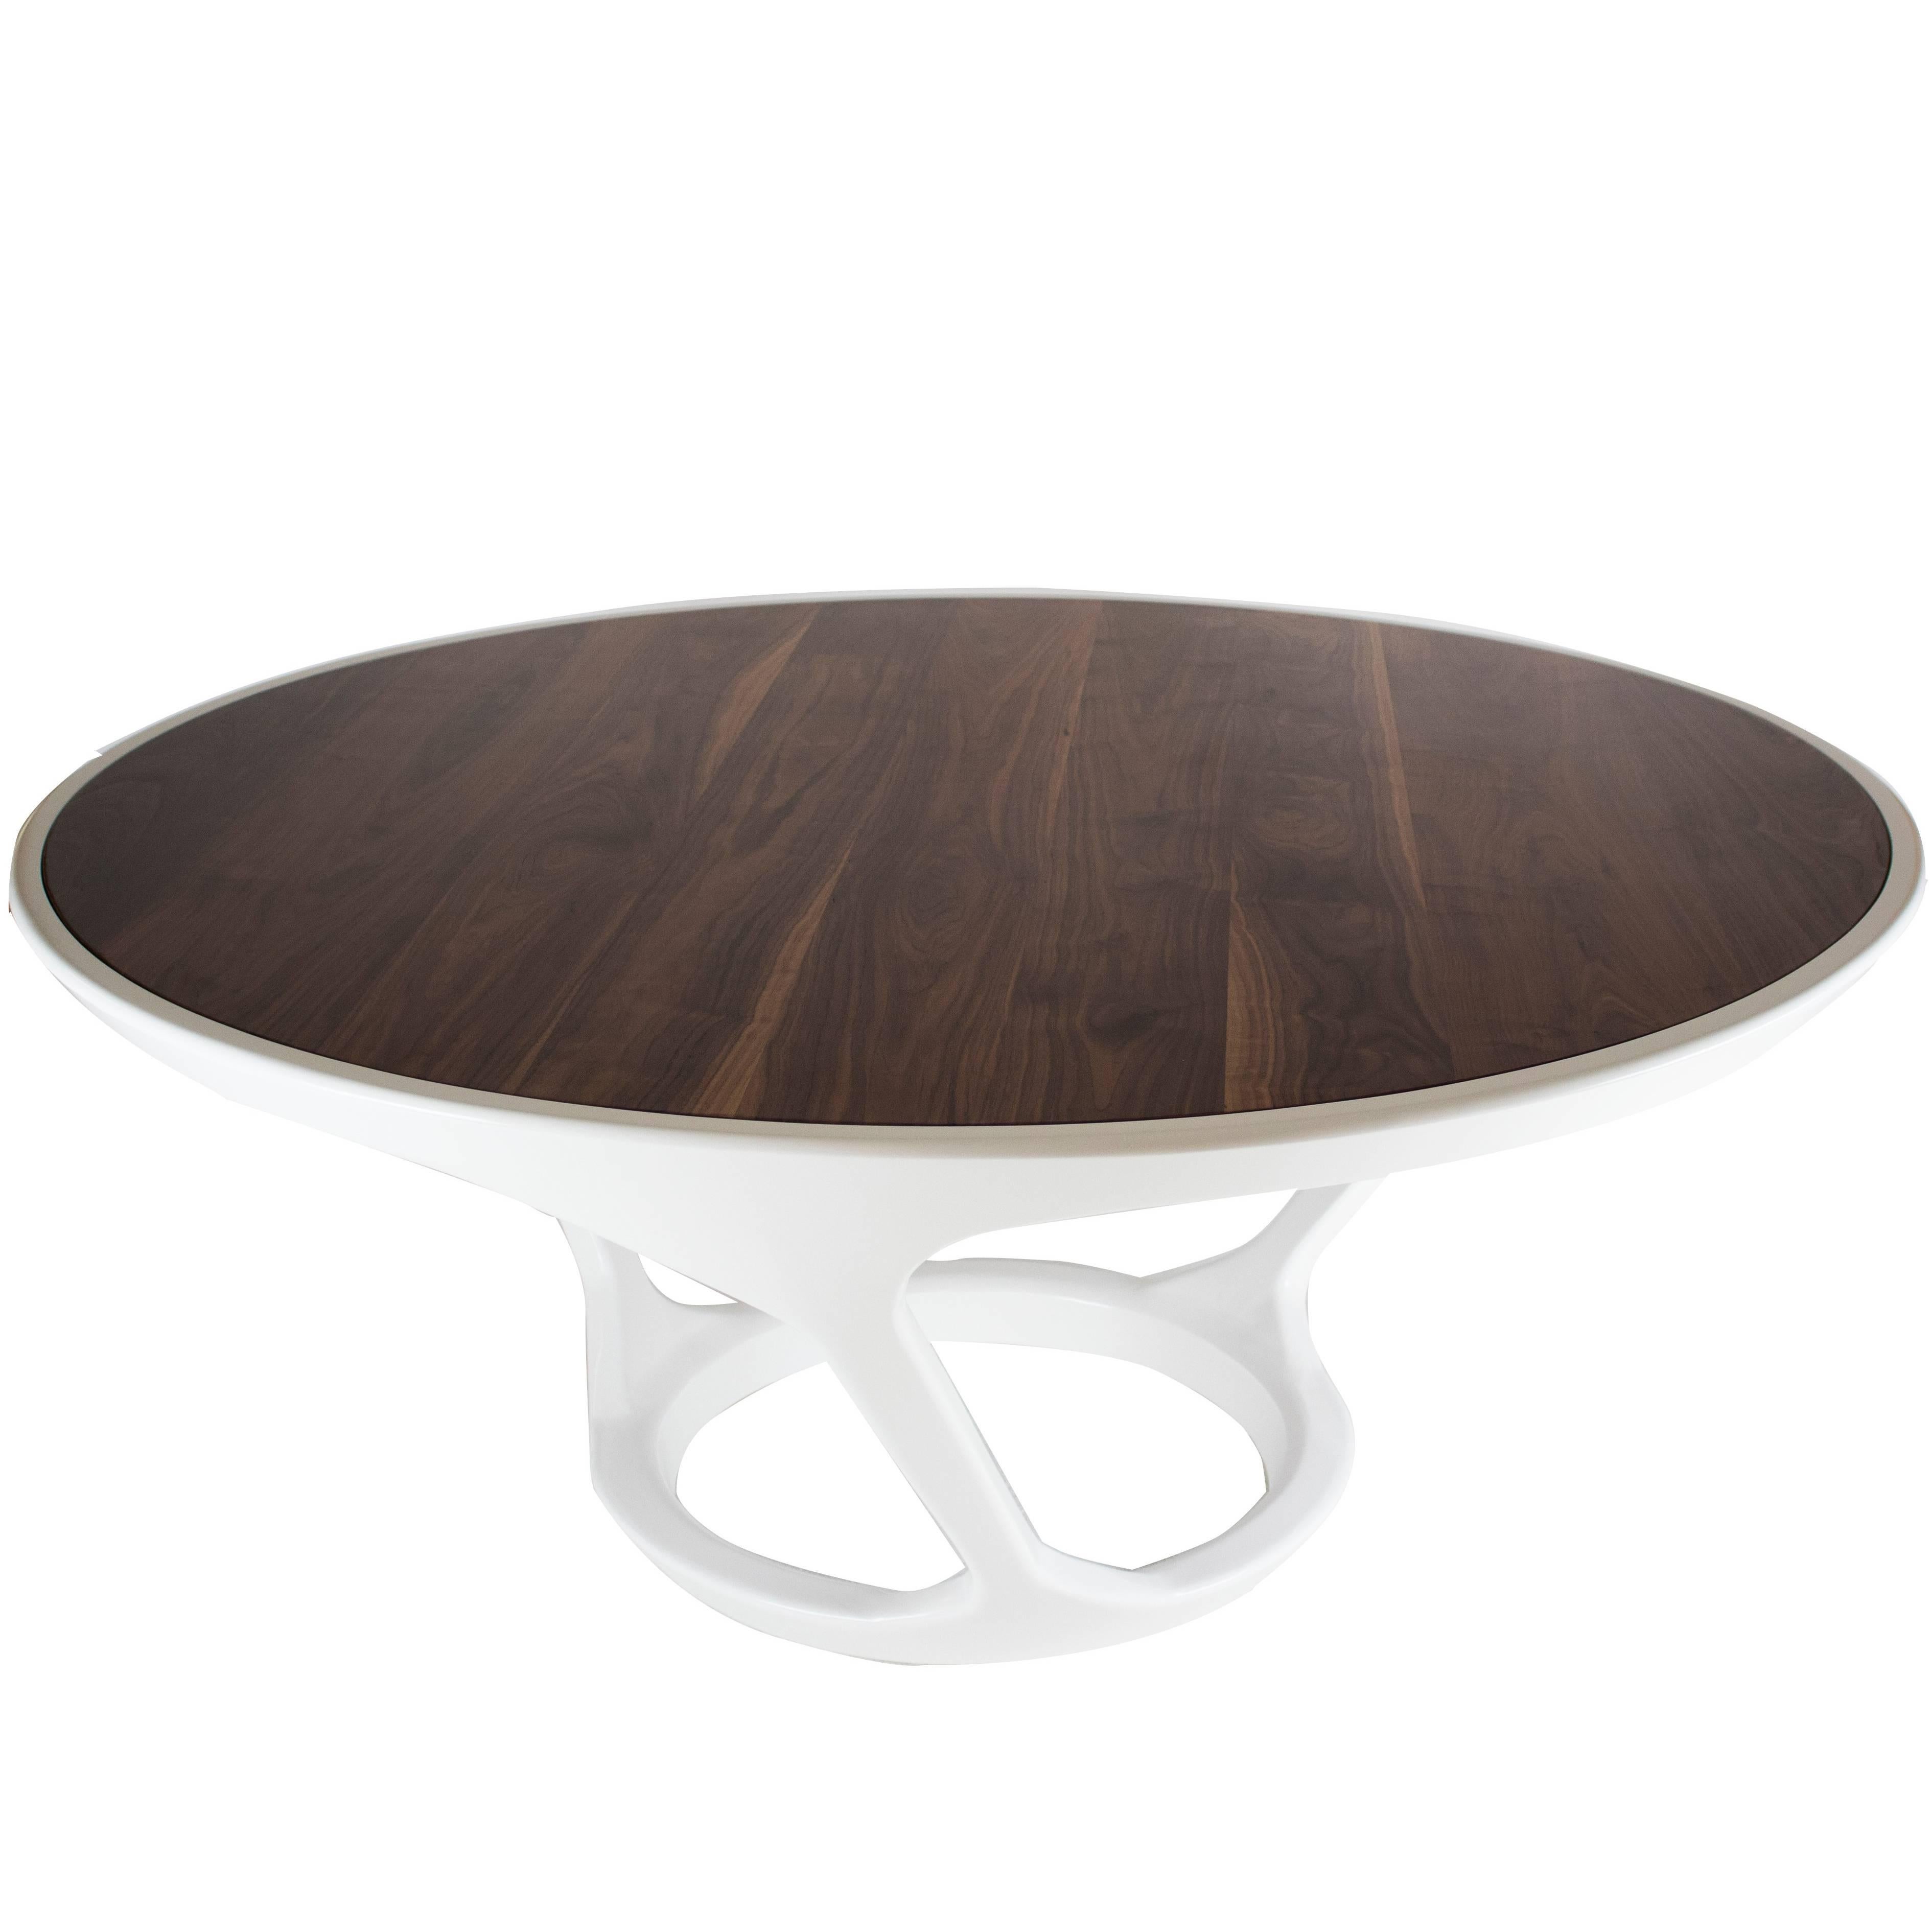 Modern Round Dining Table For Sale